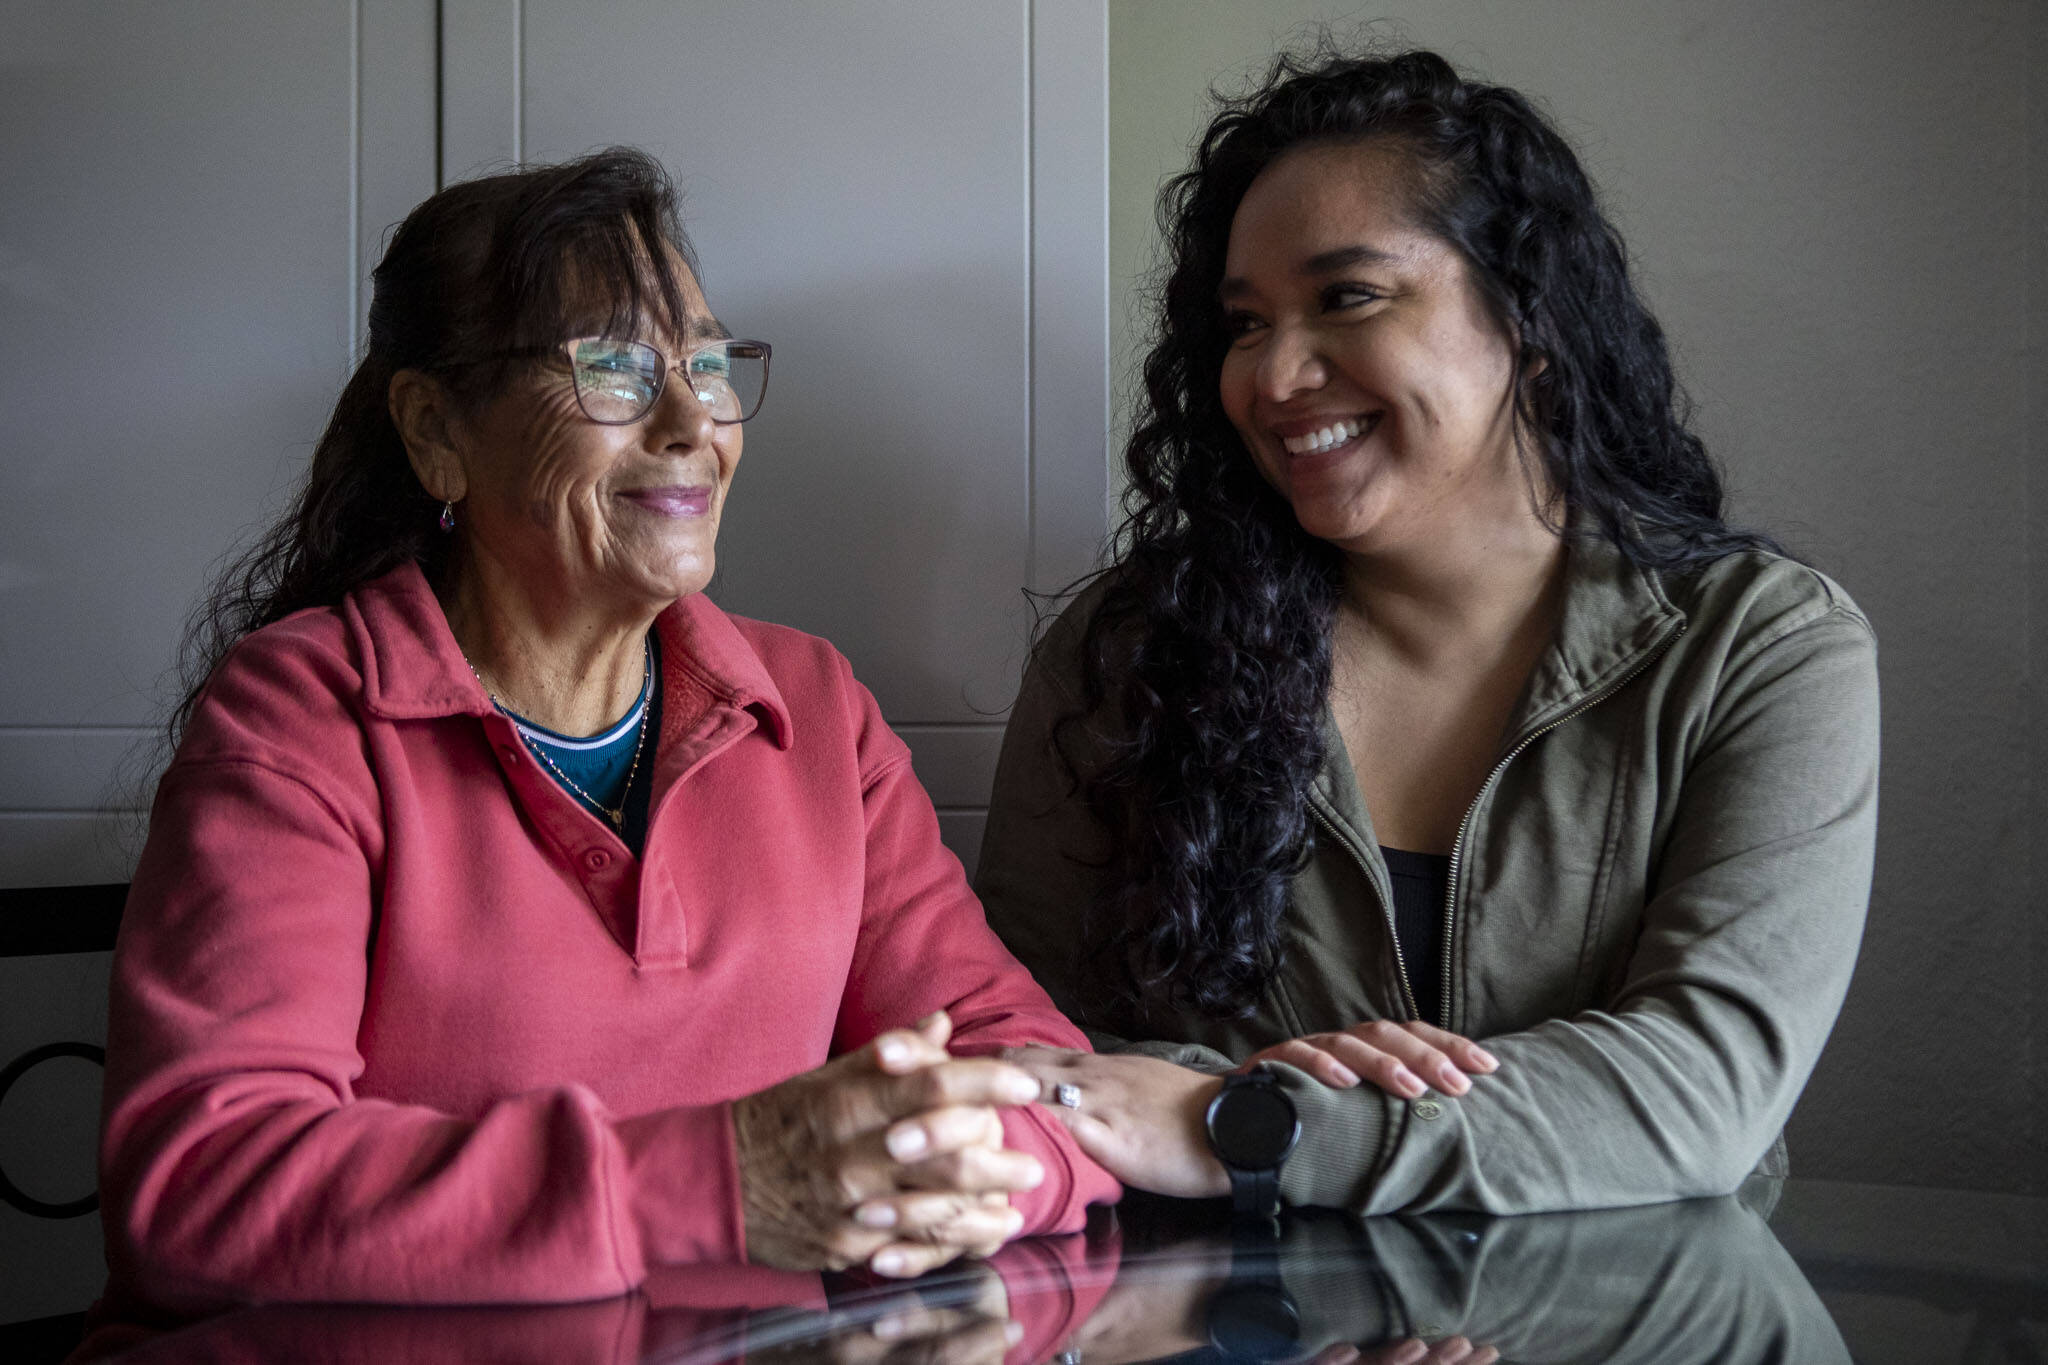 Elizabeth Cervantes, right, and her mother Maria Jimenez, left, pose for a photo at their home in Burlington, Washington on Wednesday, Dec. 6, 2023. (Annie Barker / The Herald)